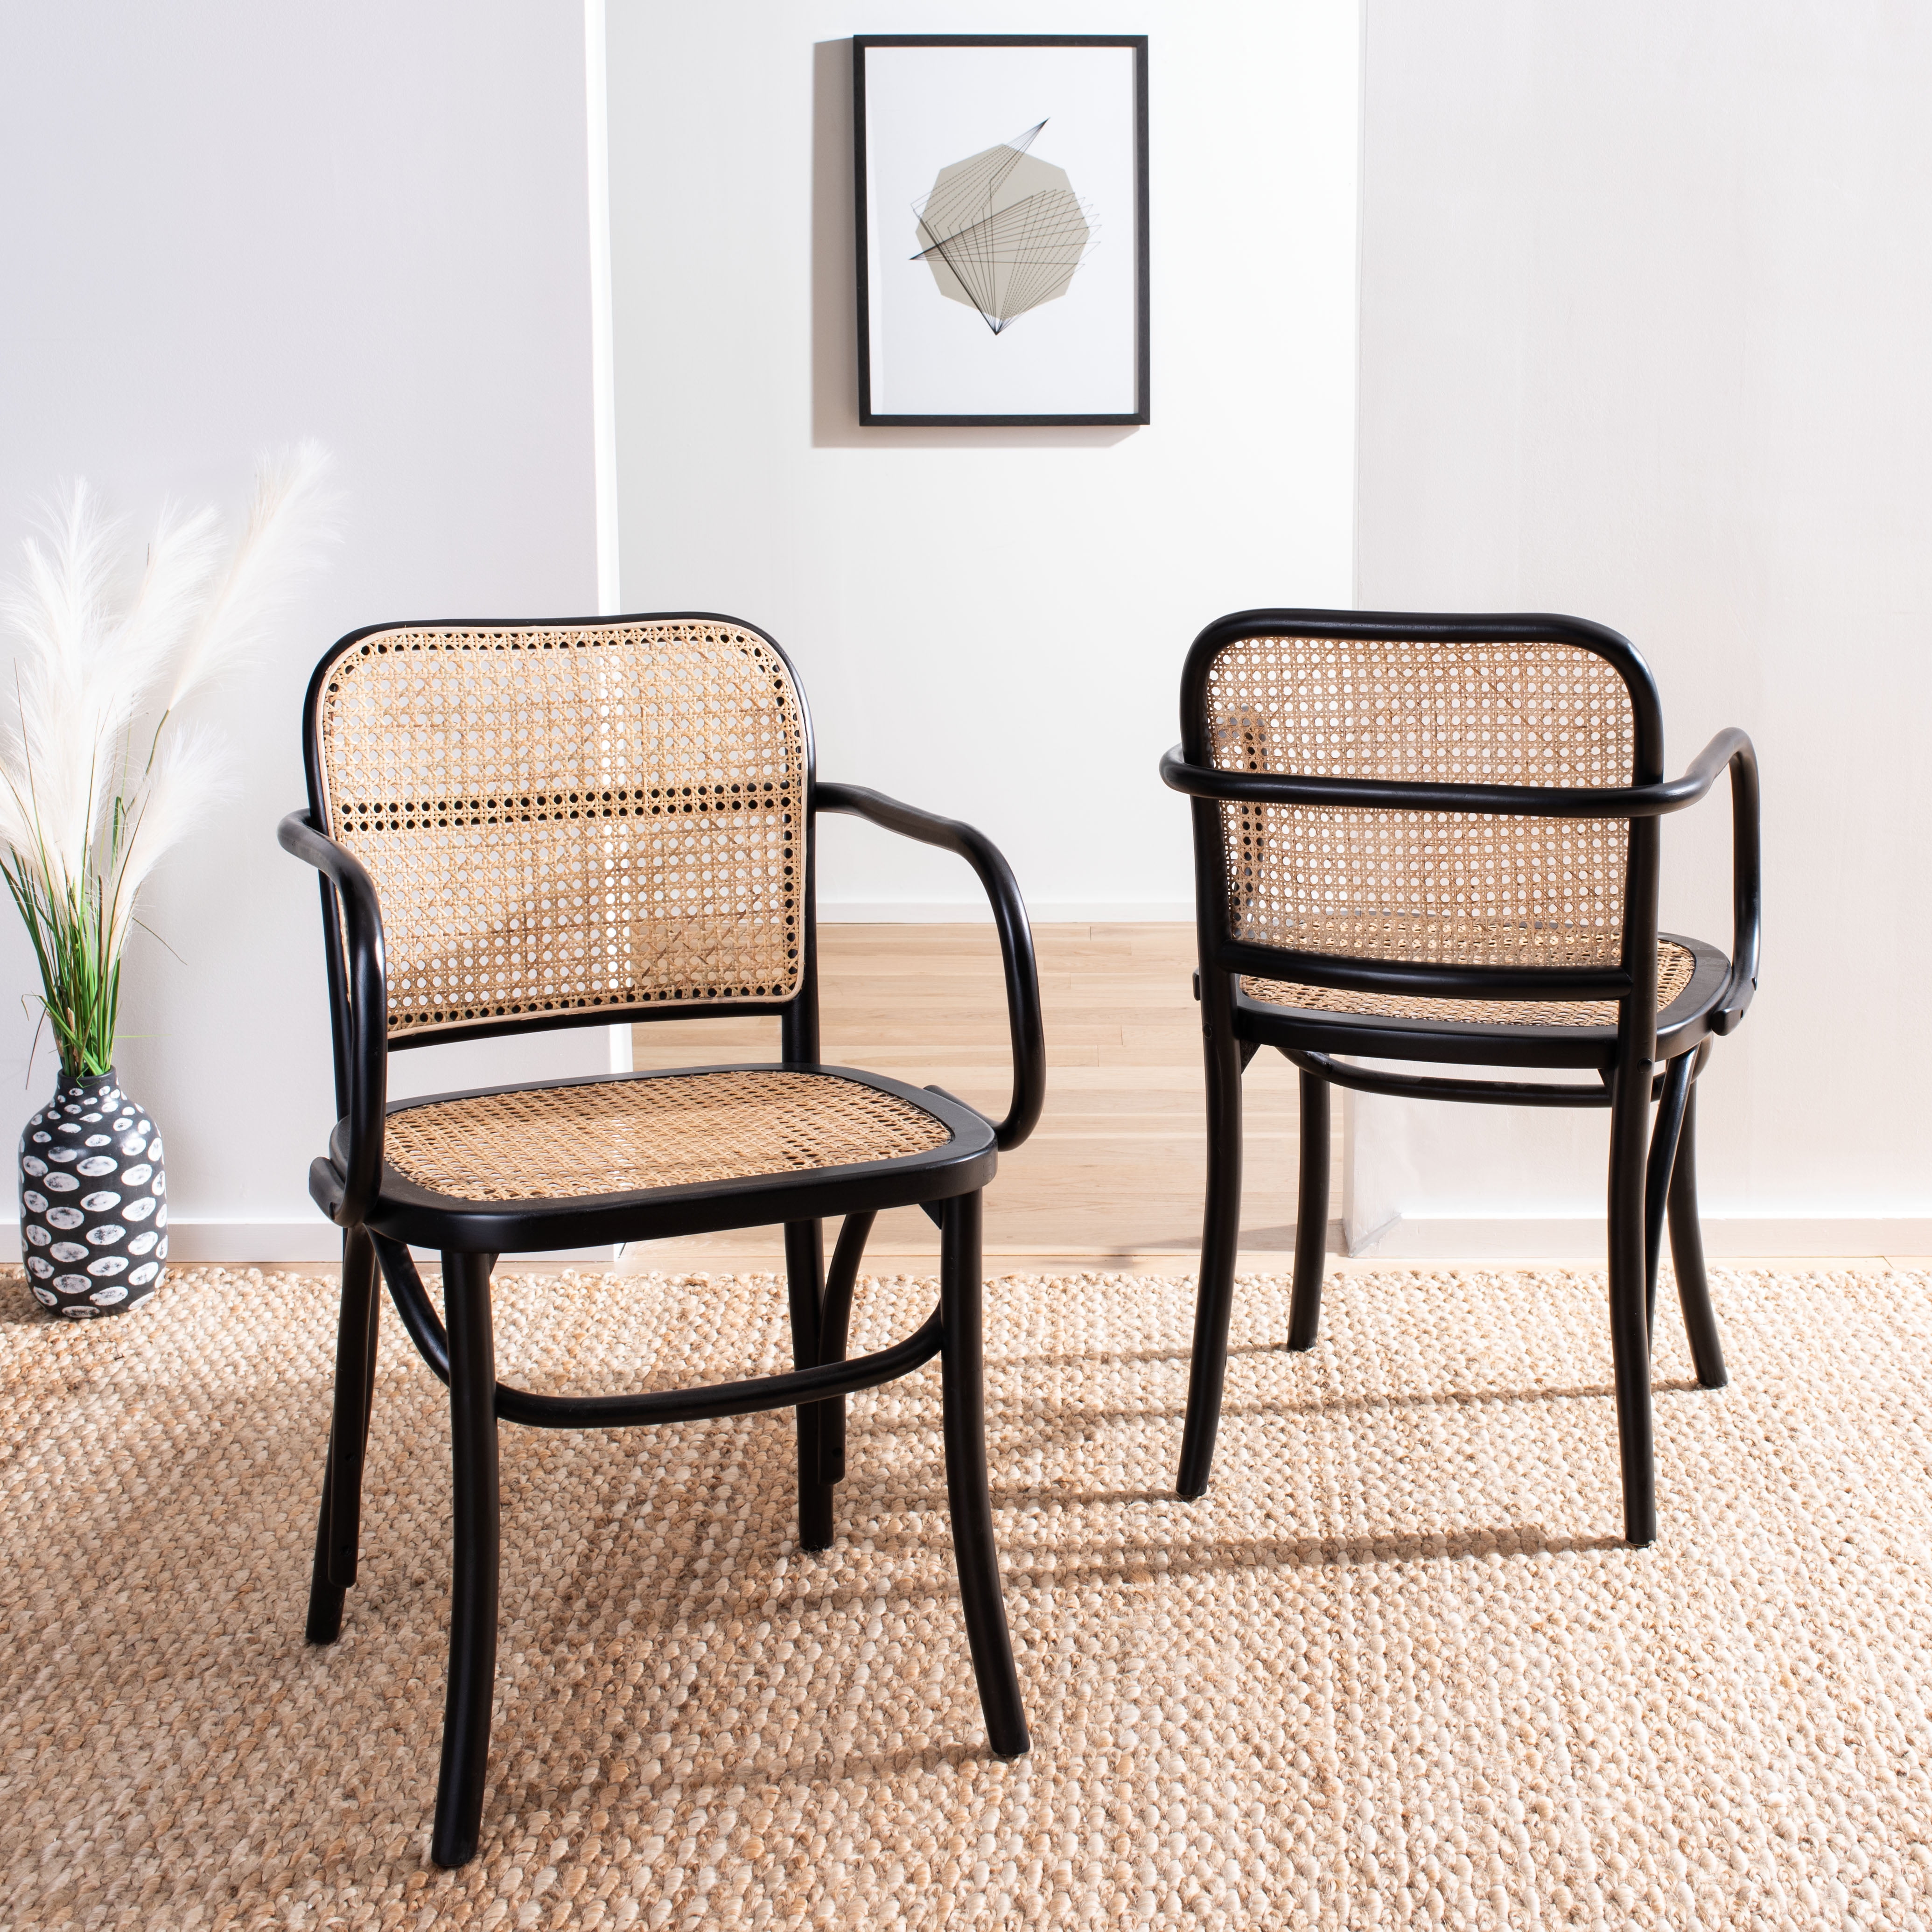 Shop Safavieh Keiko Nautical Solid Cane Dining Chair, Black/Natural from Walmart on Openhaus